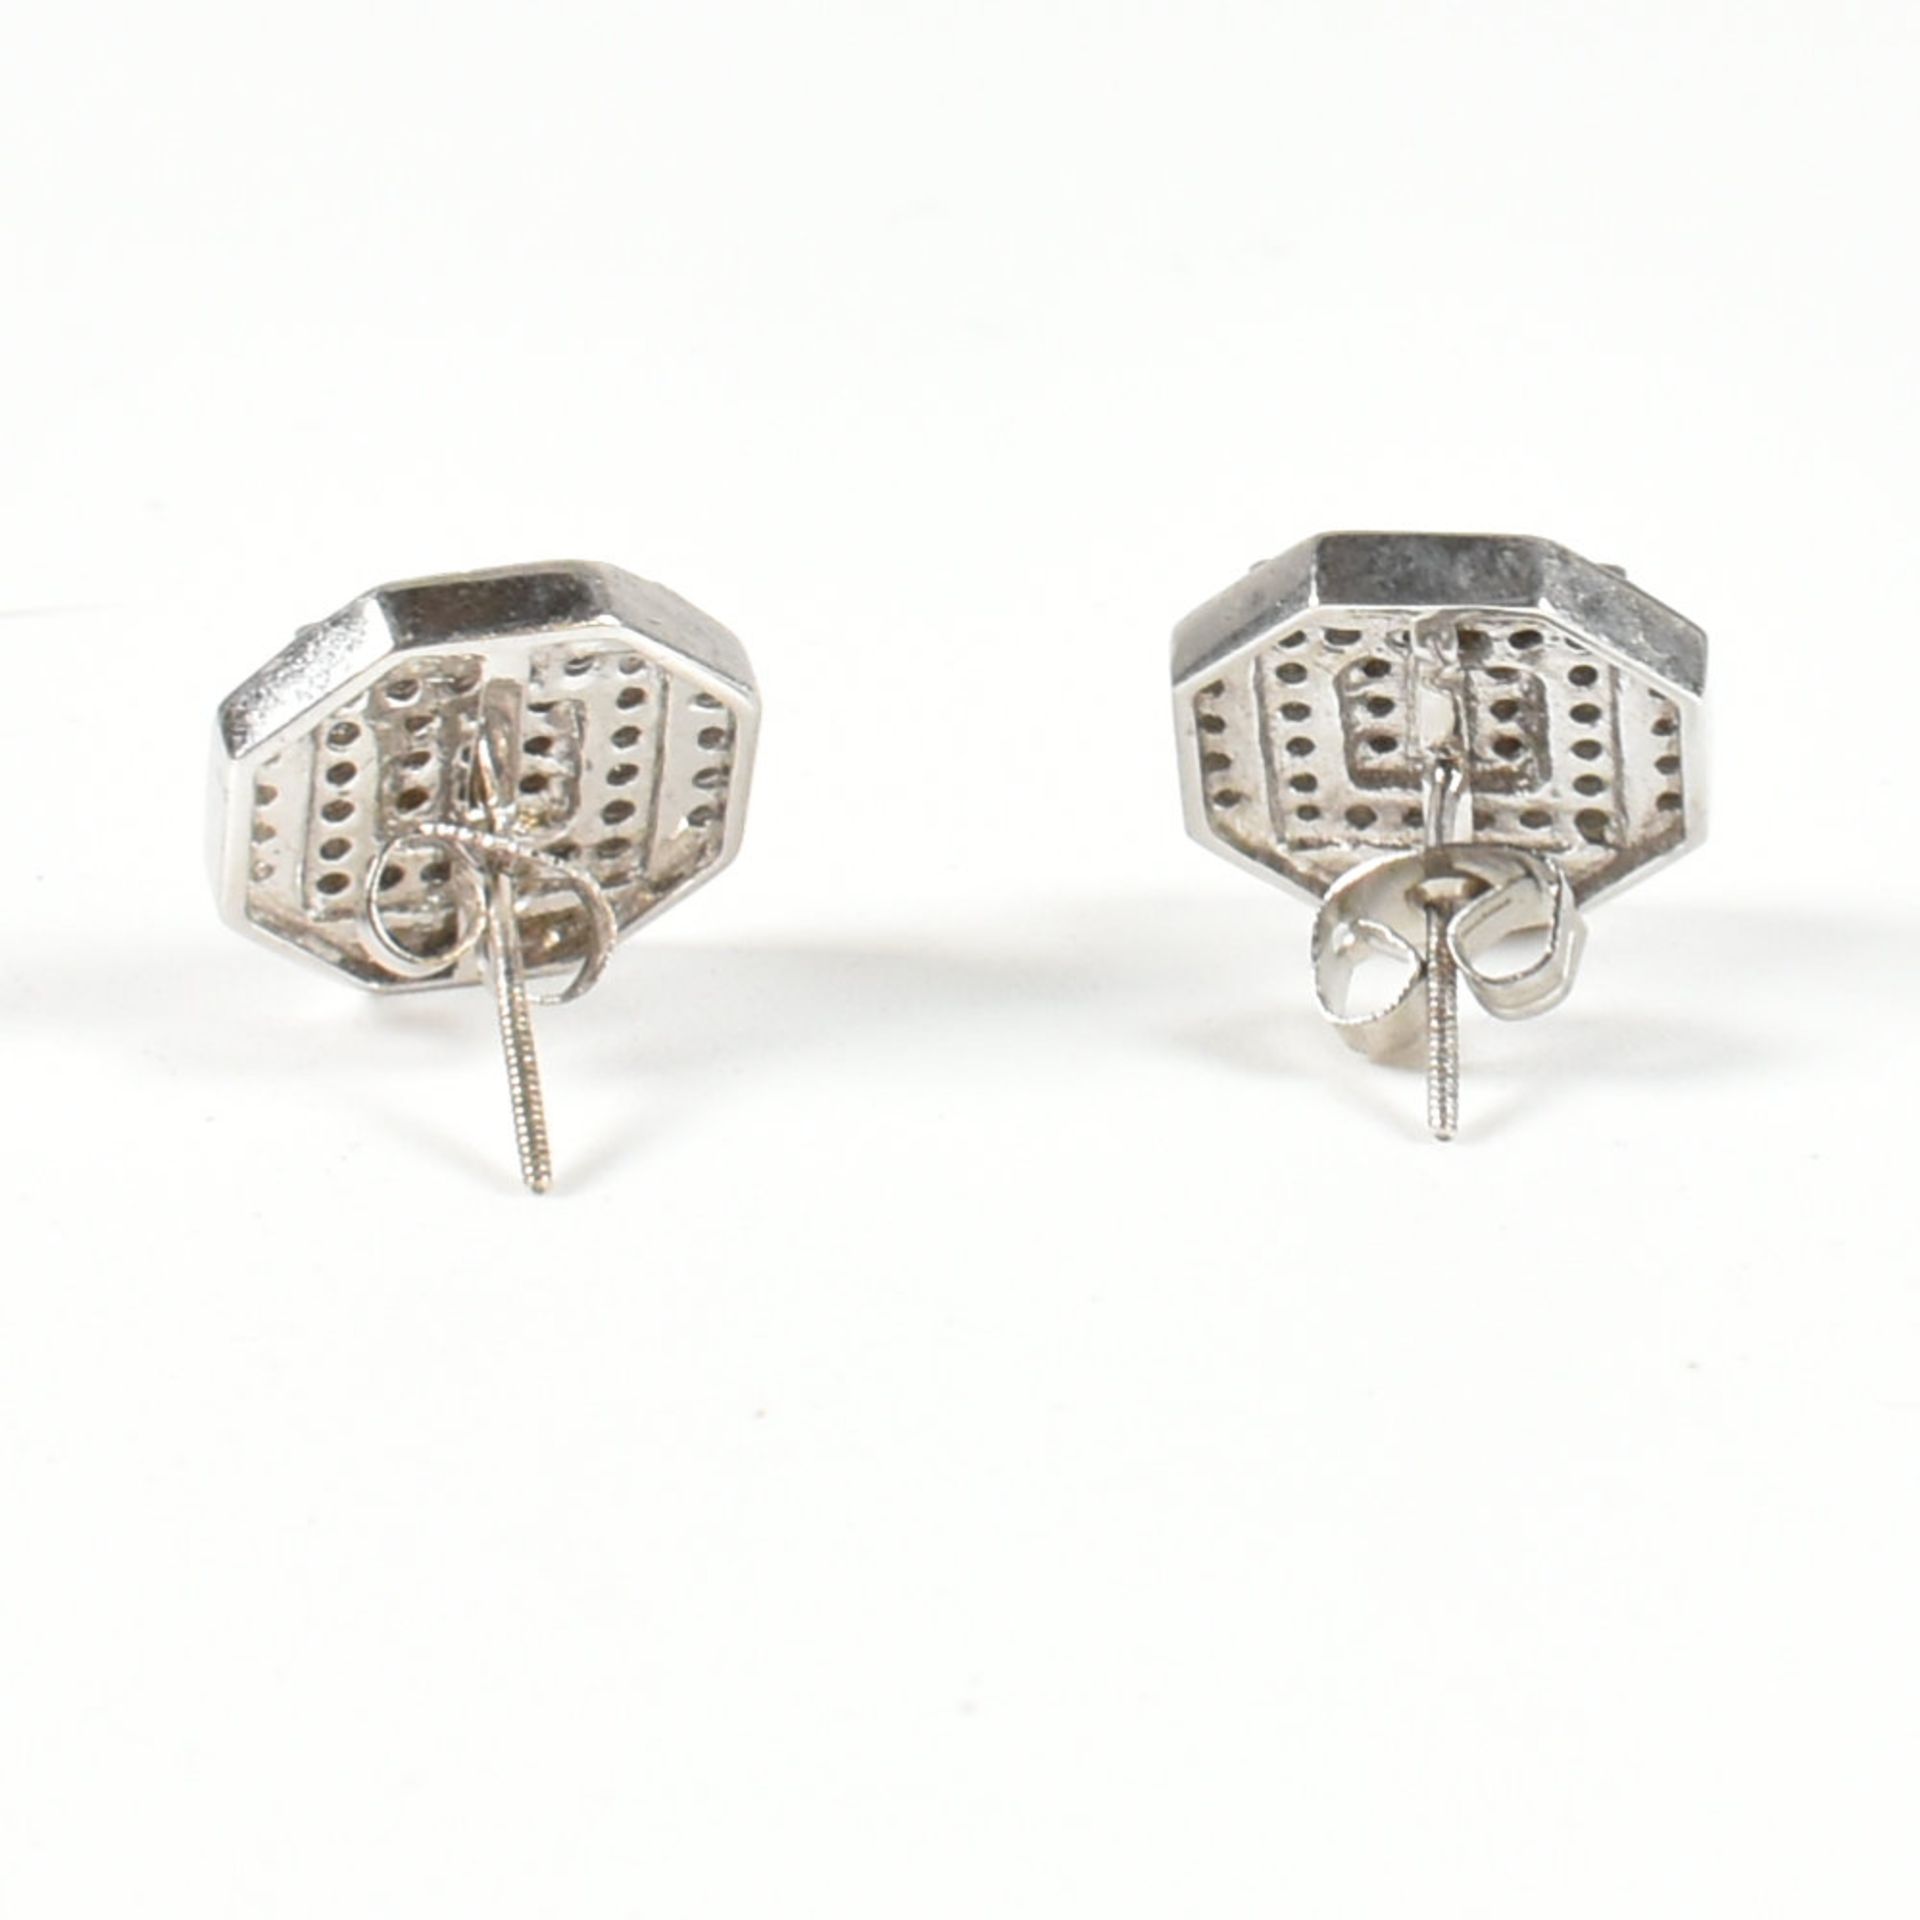 PAIR OF WHITE GOLD & DIAMOND ART DECO STYLE CLUSTER EARRINGS - Image 4 of 5